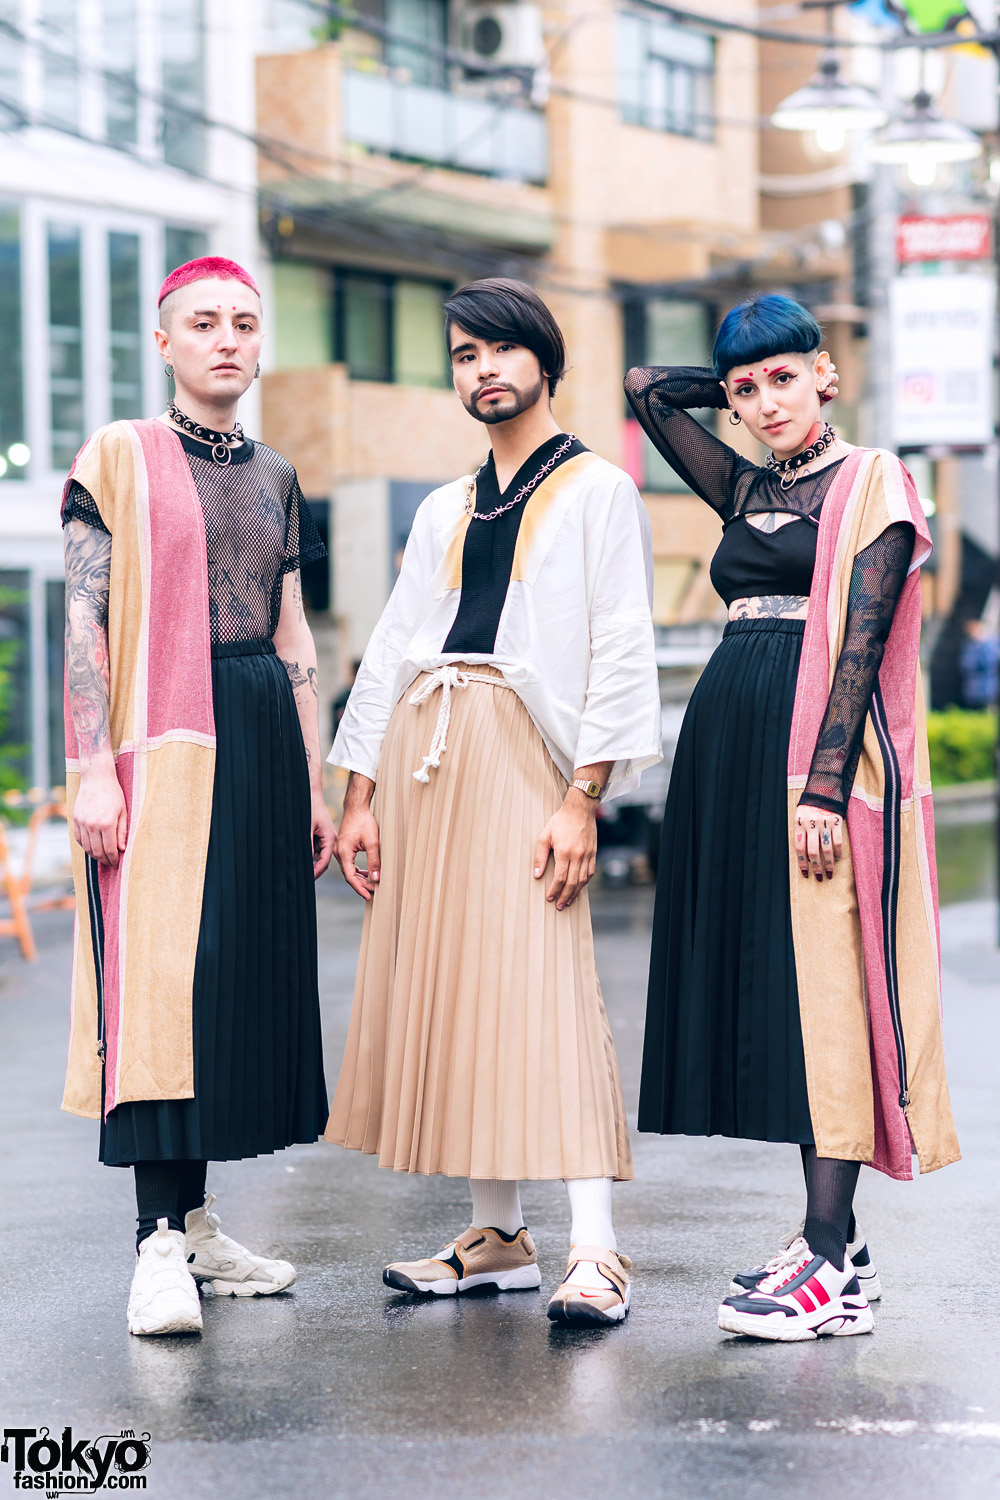 Chilean Designer Cris Miranda Street Styles in Tokyo w/ Pink & Blue Hair, Half-Robes, Remake Fashion, Pleated Maxi Skirts, Barbwire Necklace & Tabi Sneakers